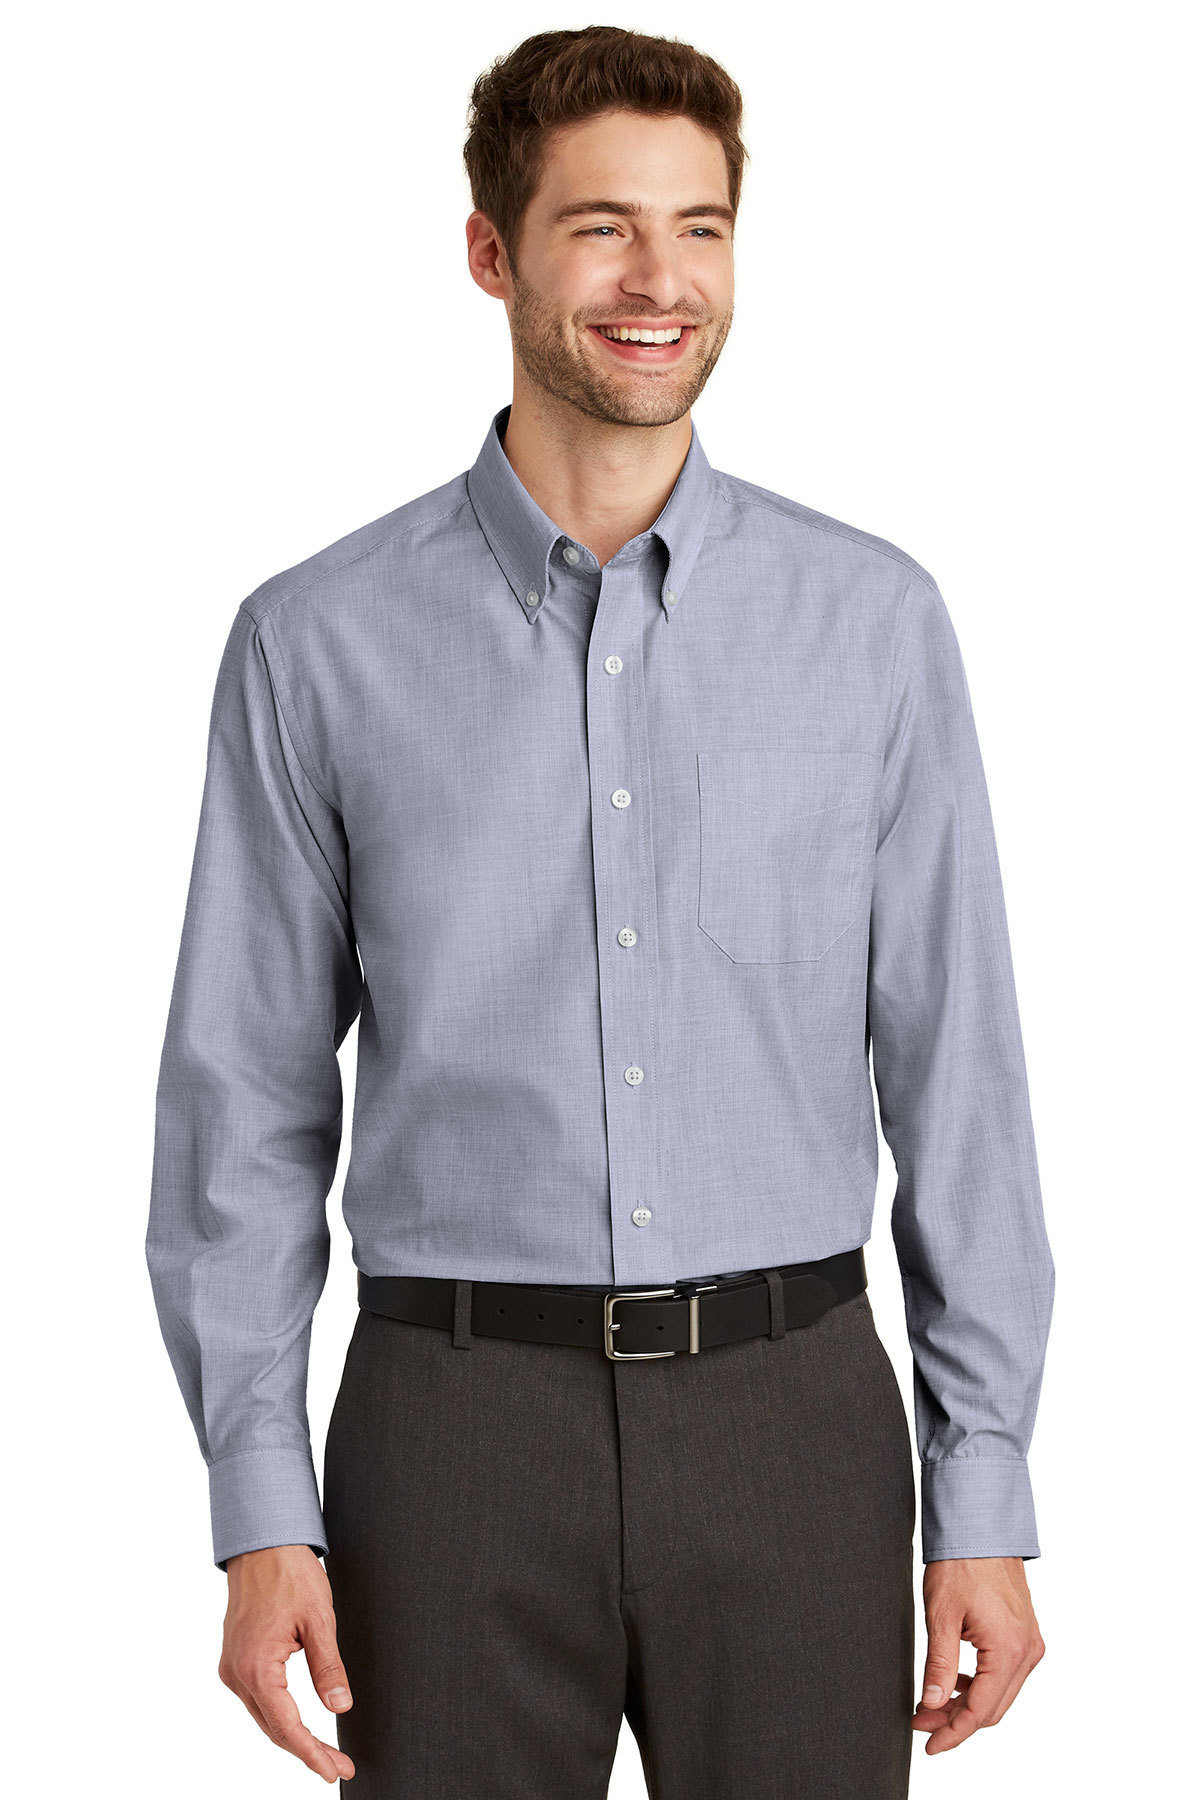 Port Authority Crosshatch Easy Care Shirt | Product | Company Casuals